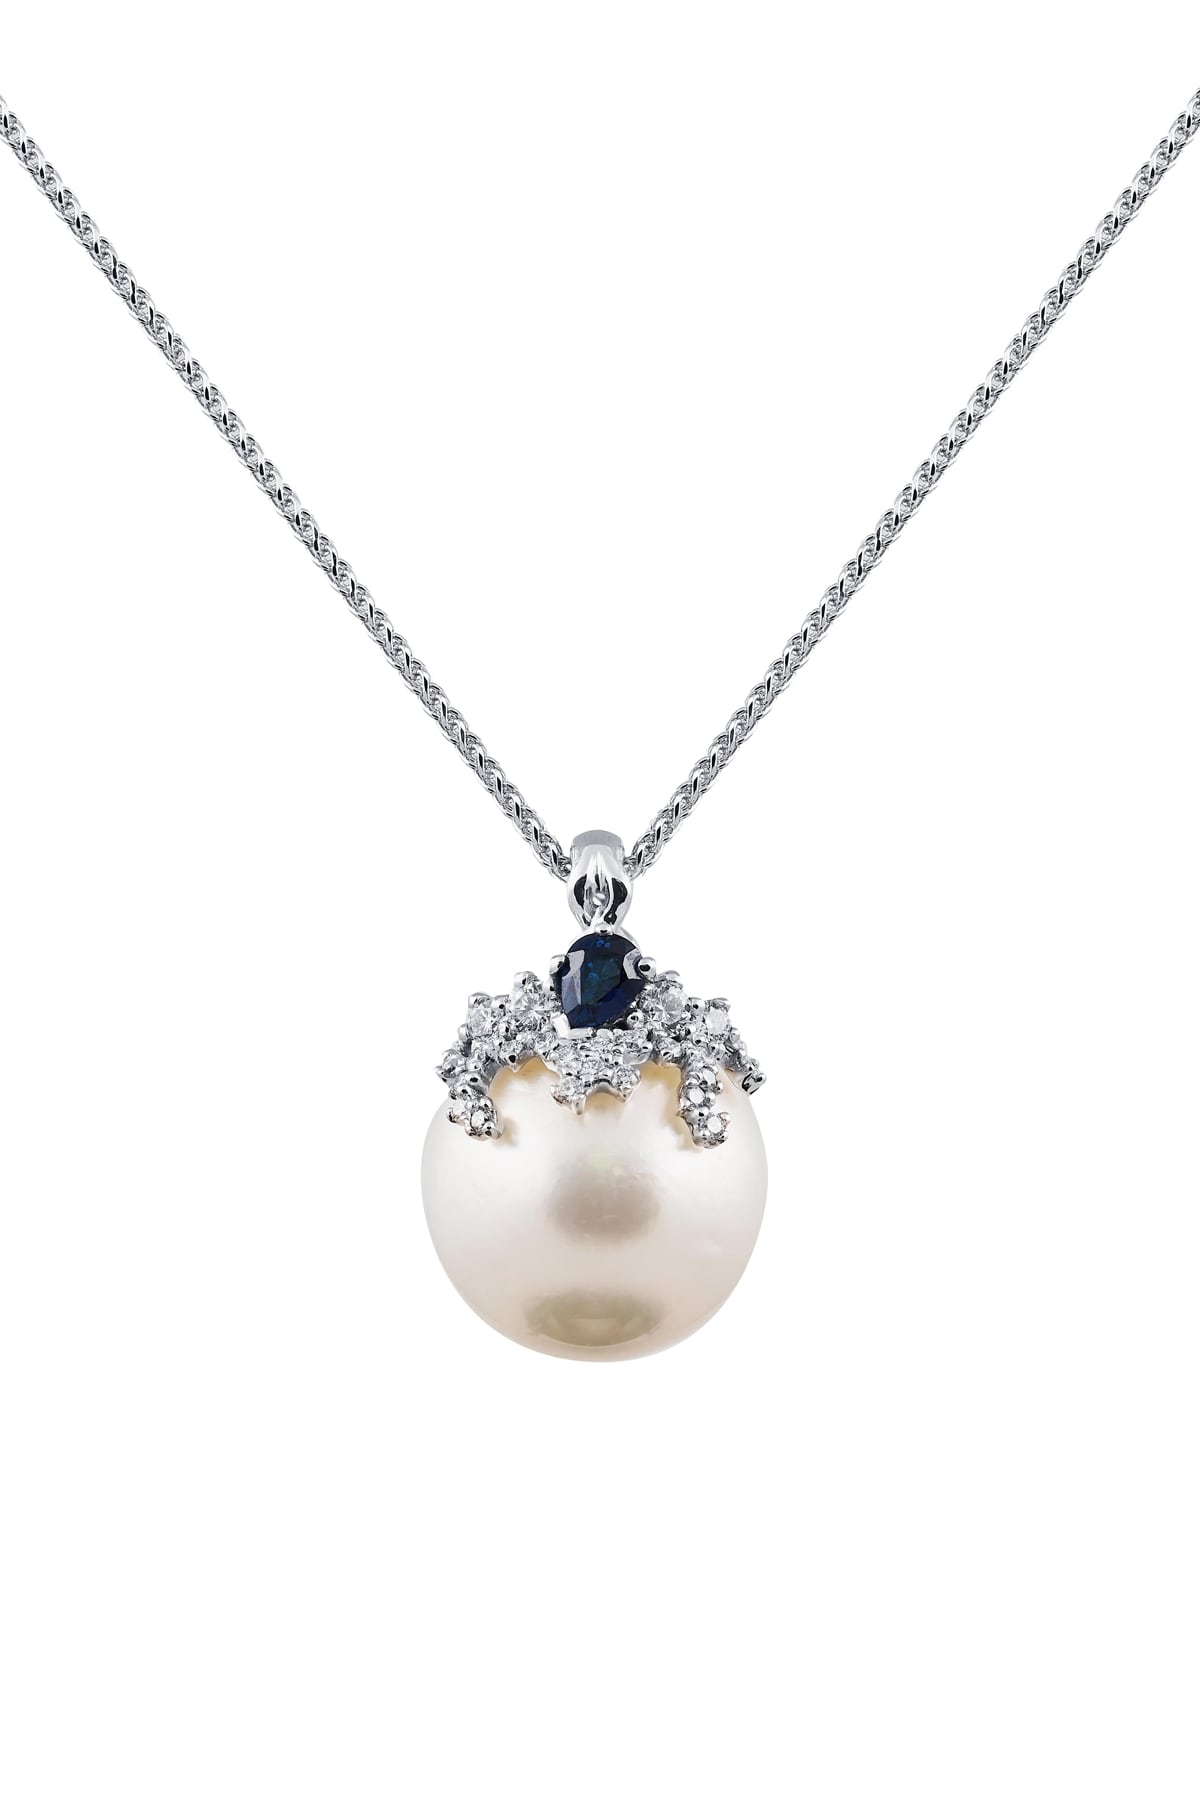 South Sea Pearl Pendant with Natural Sapphire & Diamonds in 18k White Gold from LeGassick Jewellery Gold Coast, Australia.